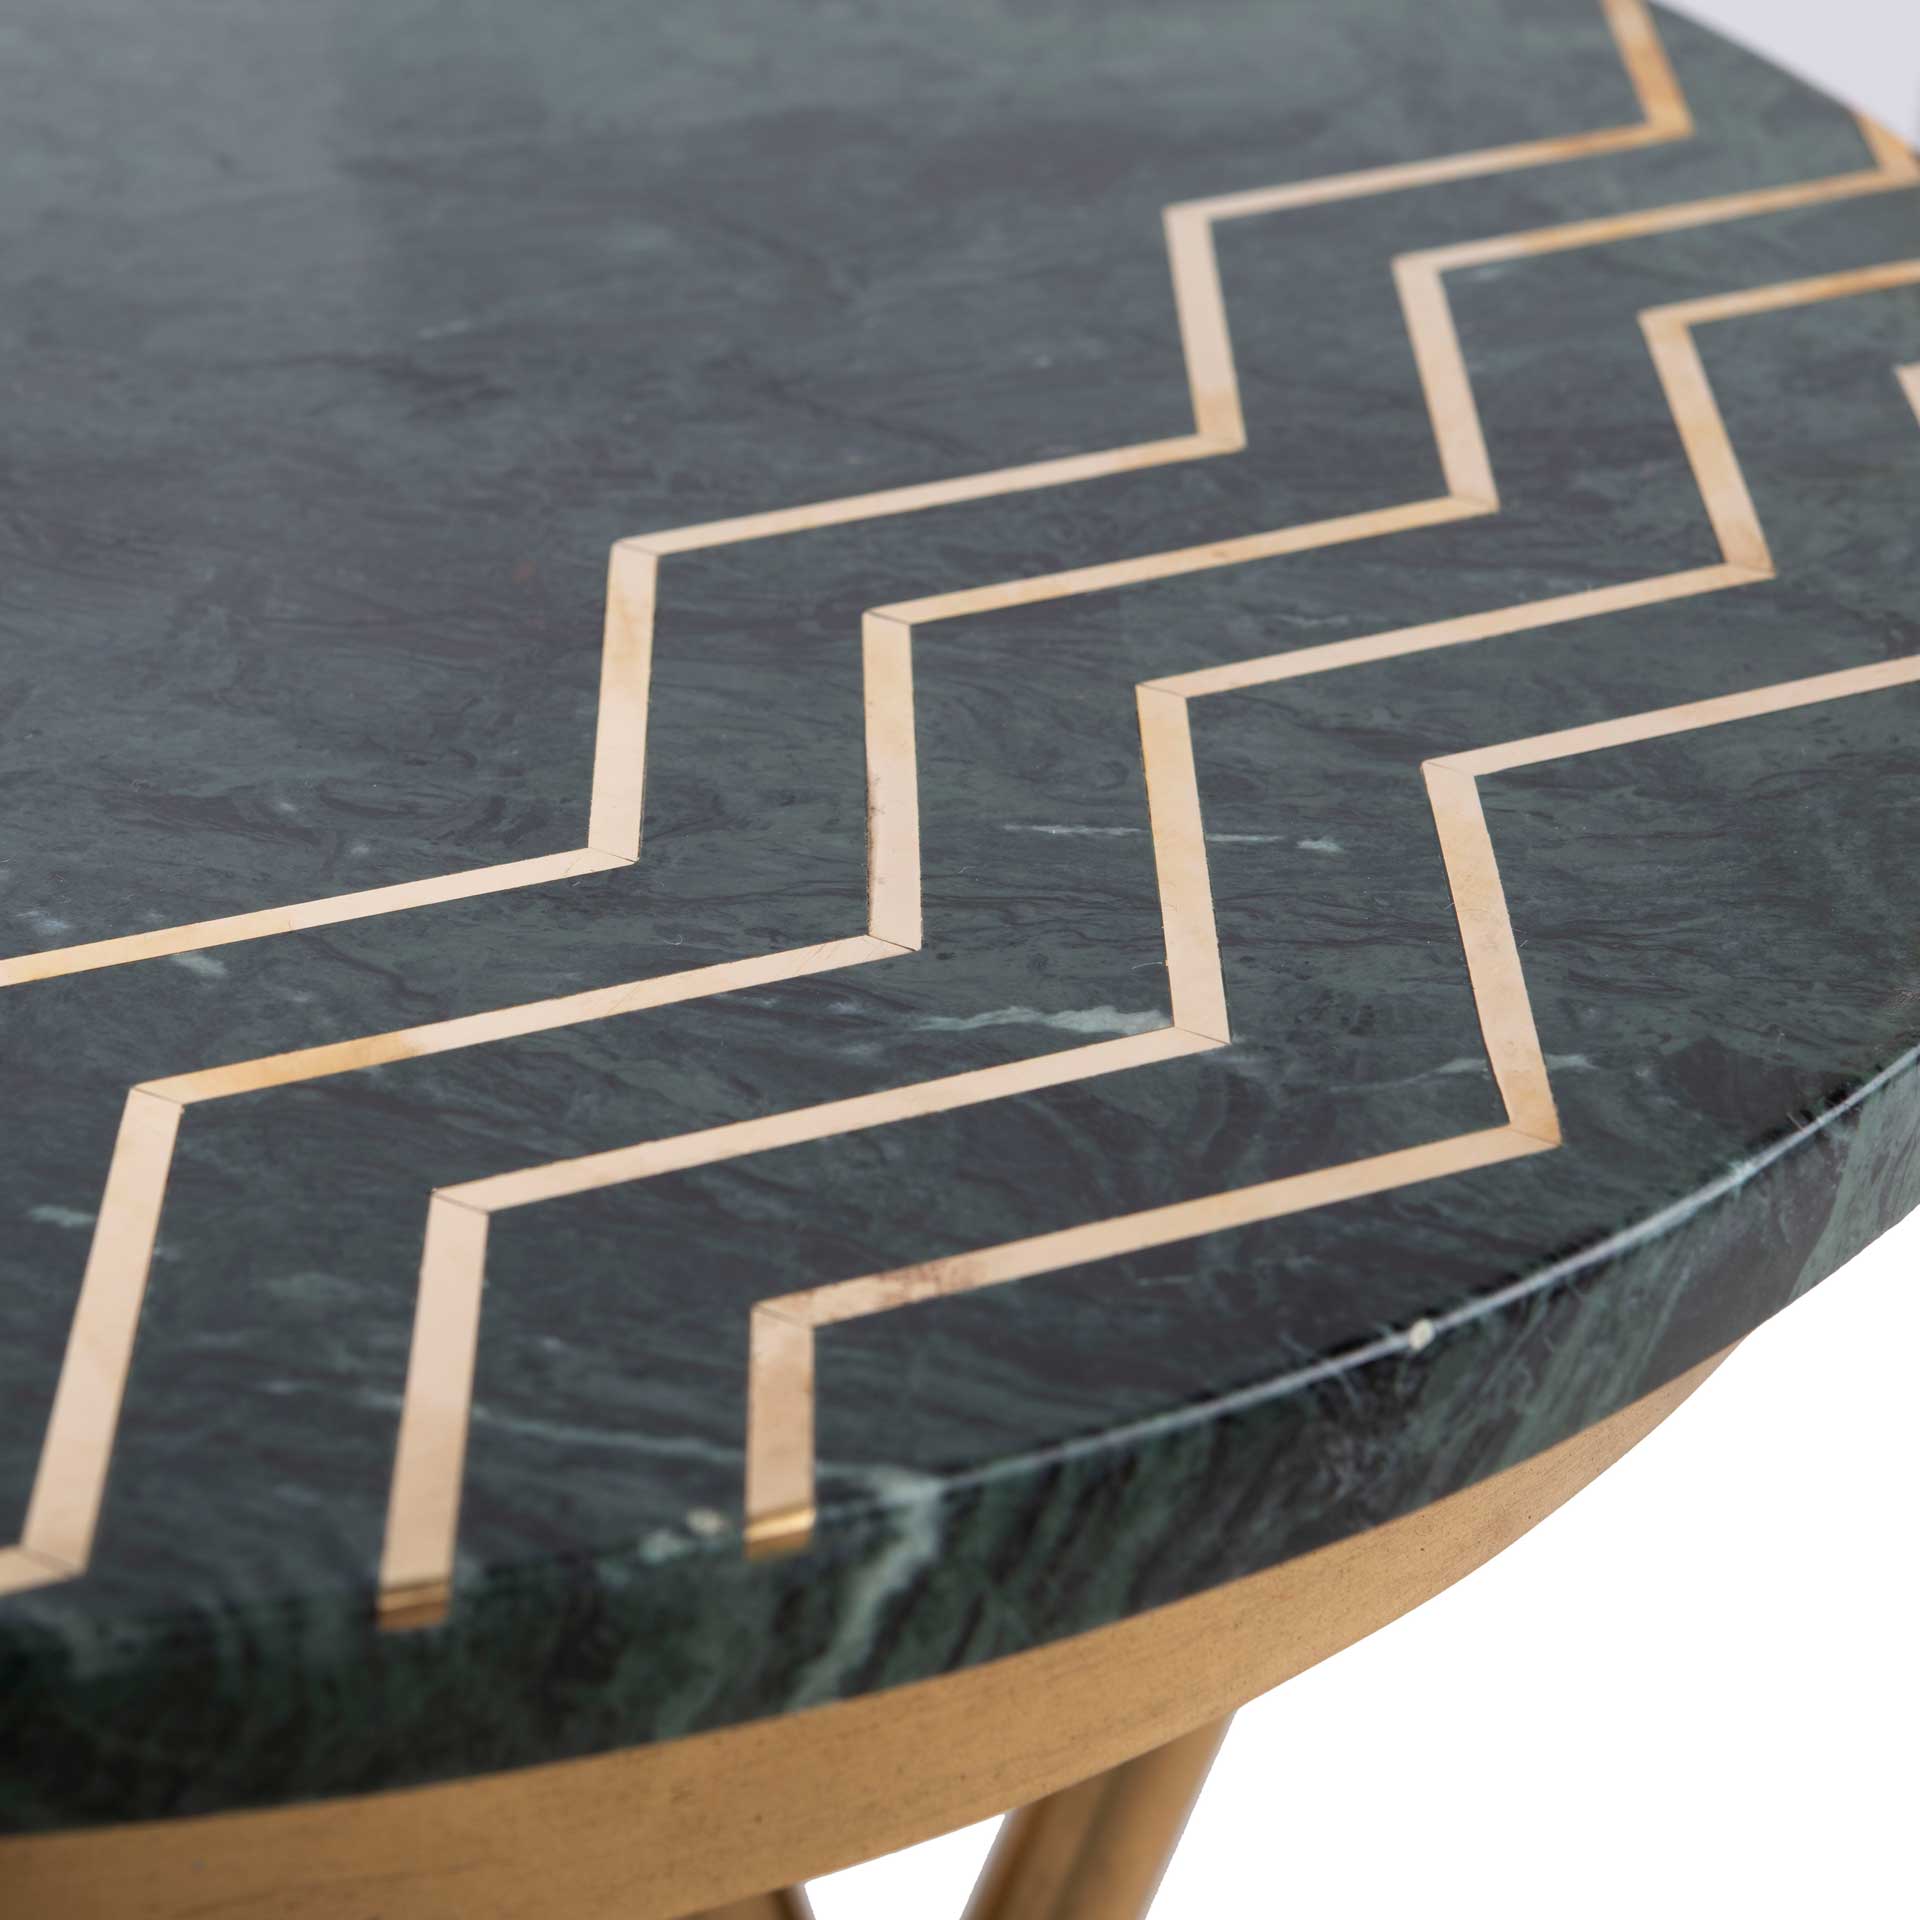 Constellation Marble Accent Table Dark Green/Black/Gold